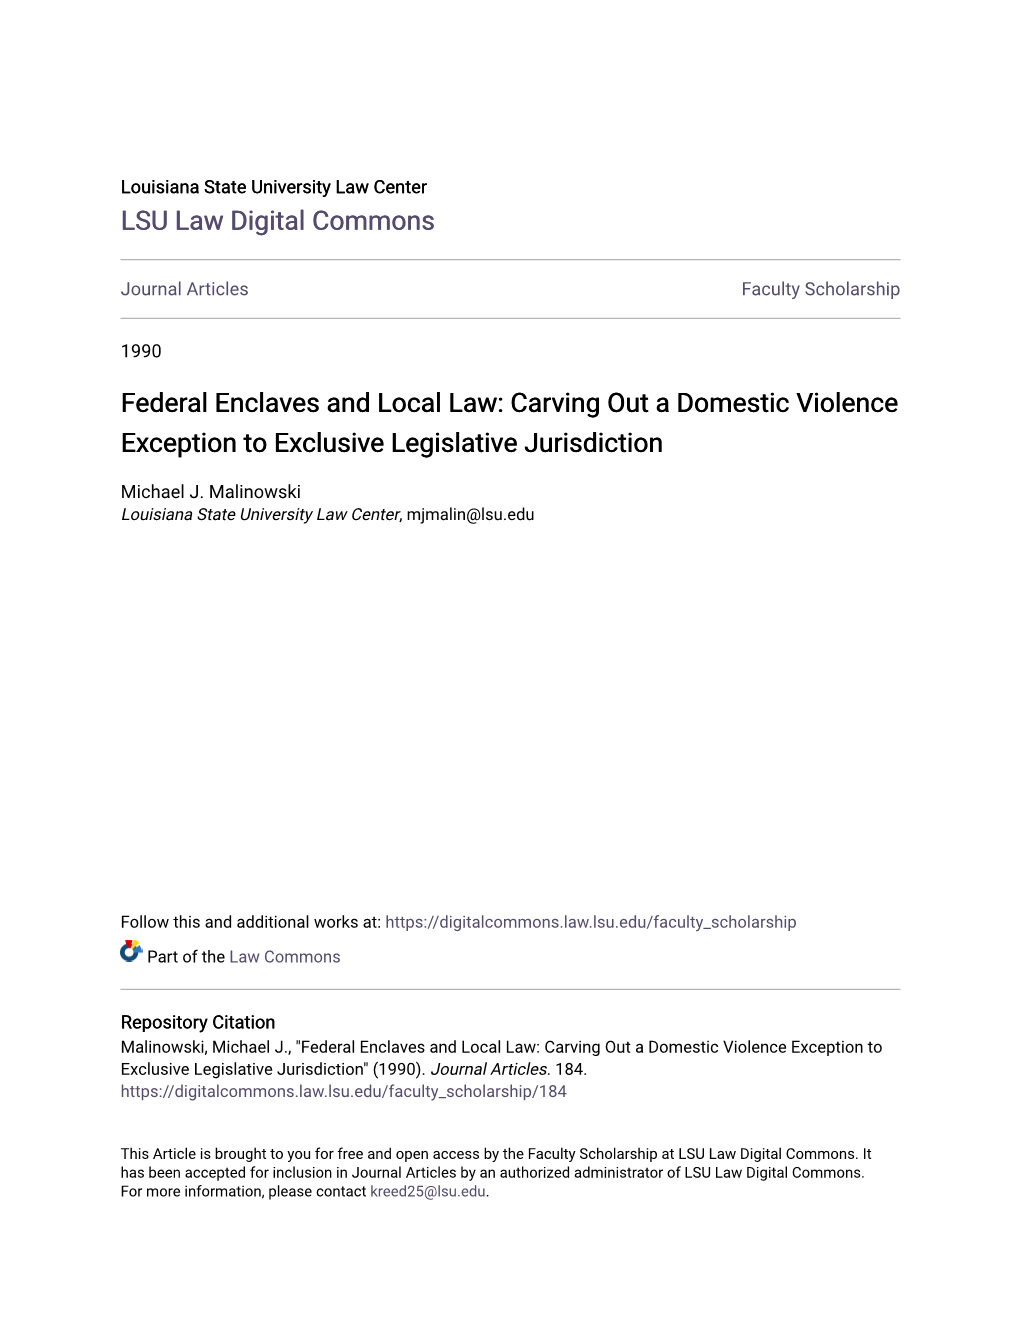 Federal Enclaves and Local Law: Carving out a Domestic Violence Exception to Exclusive Legislative Jurisdiction